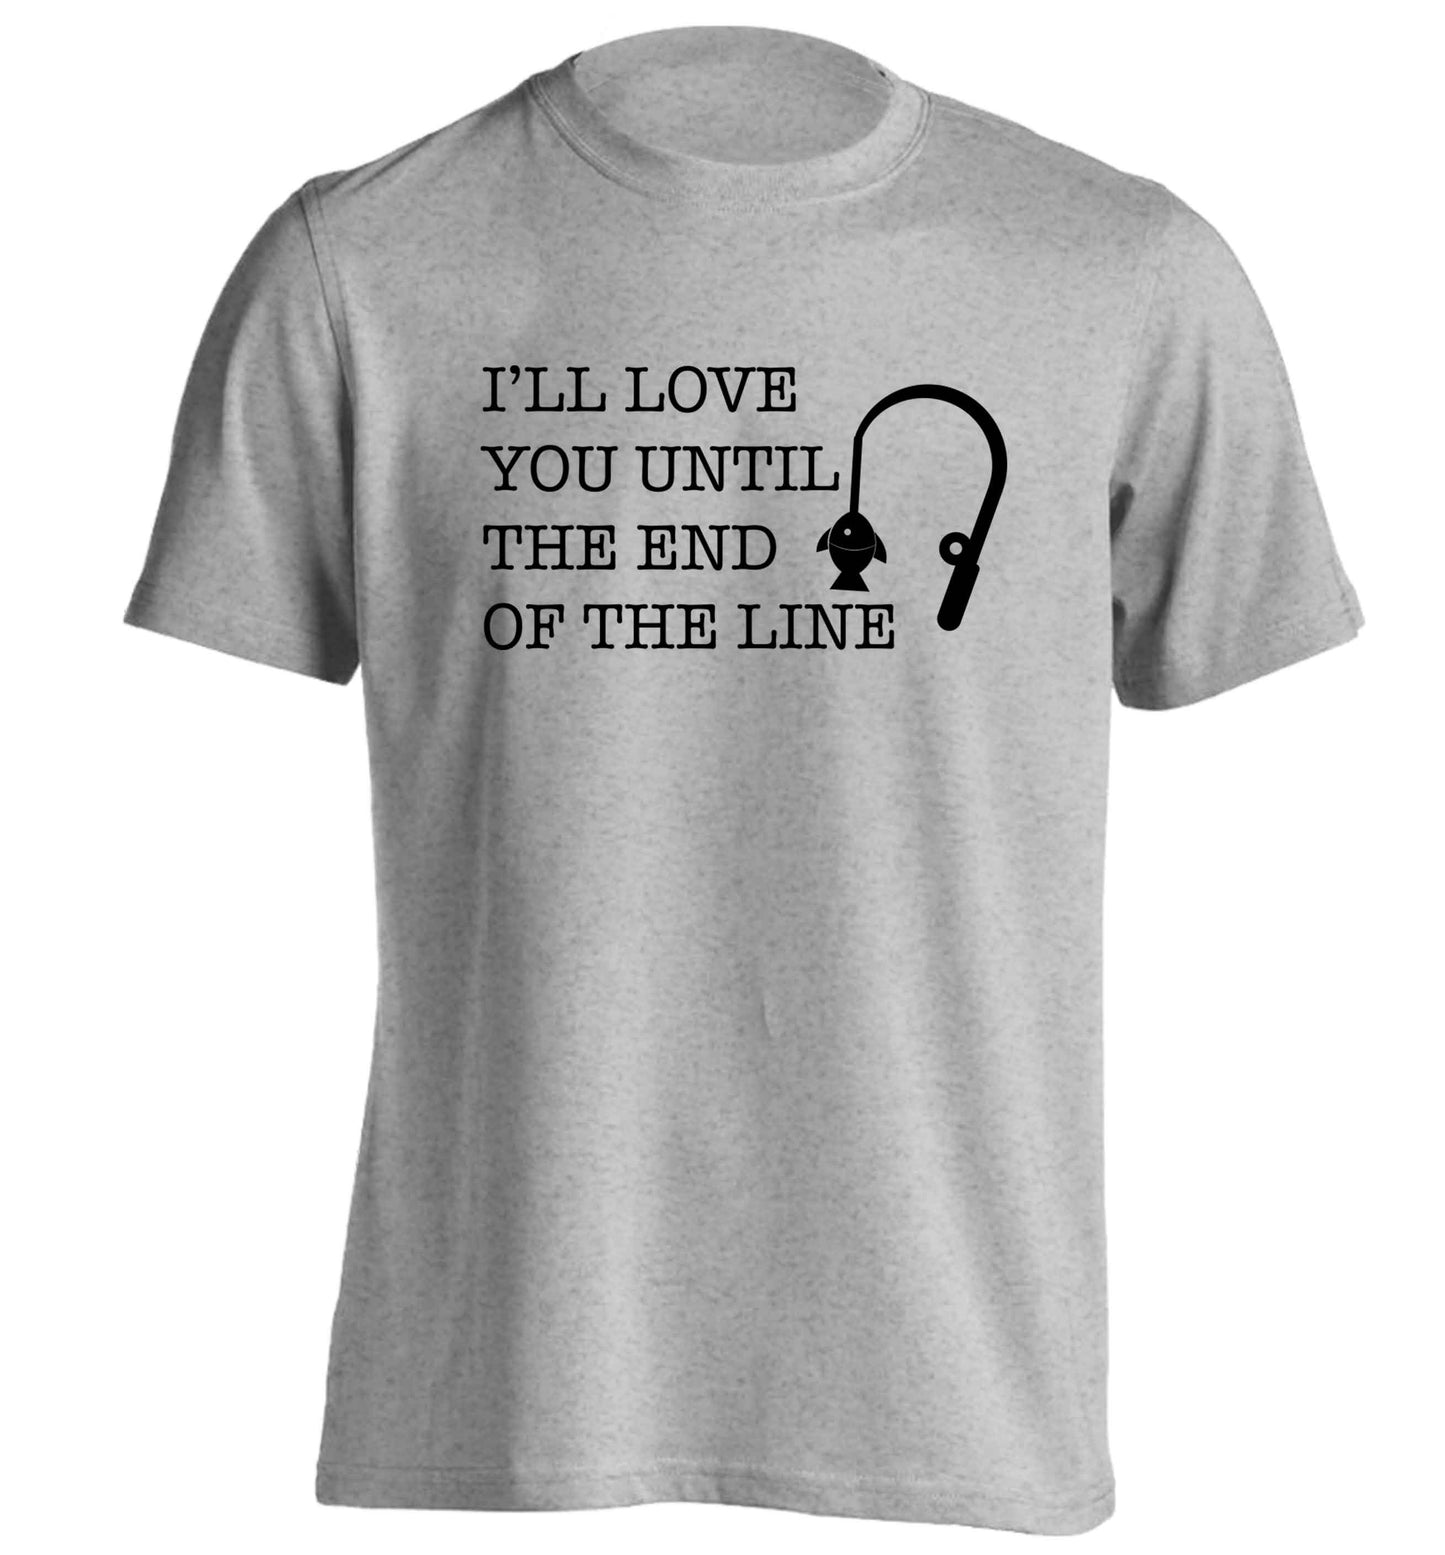 I'll love you until the end of the line adults unisex grey Tshirt 2XL